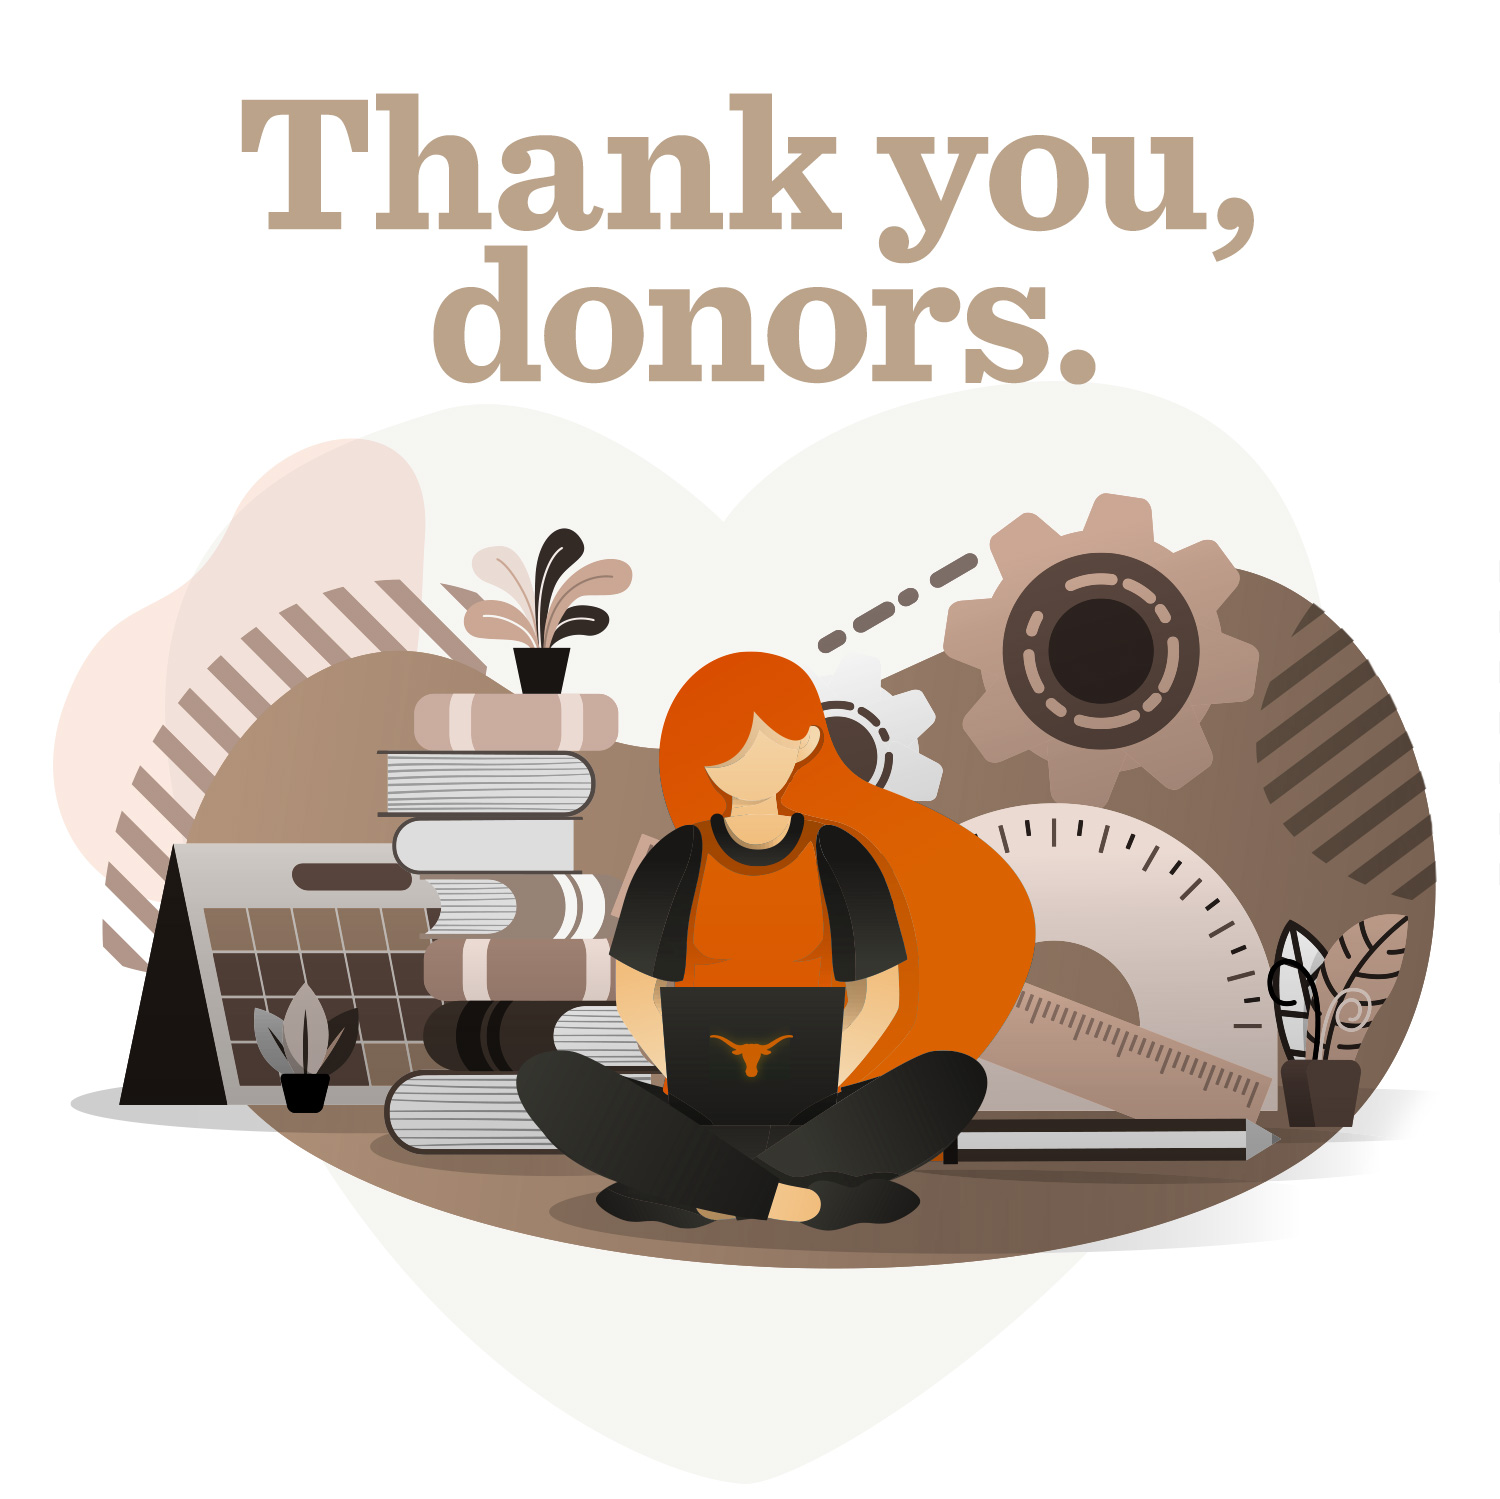 Thank you, donors.